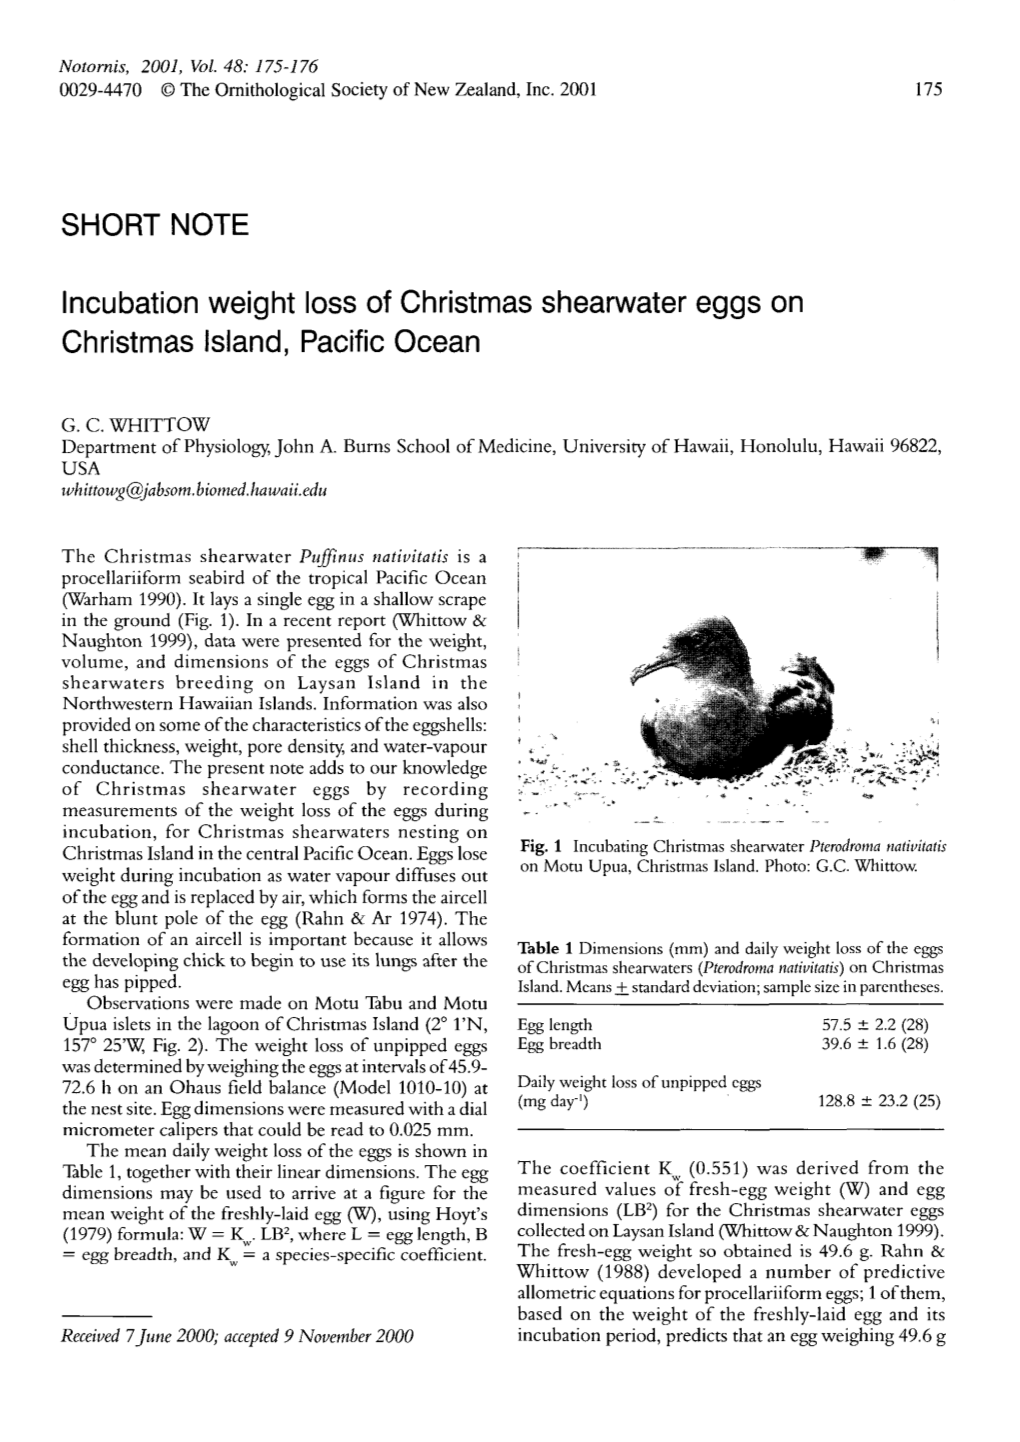 Lncubation Weight Loss of Christmas Shearwater Eggs on Christmas Island, Pacific Ocean